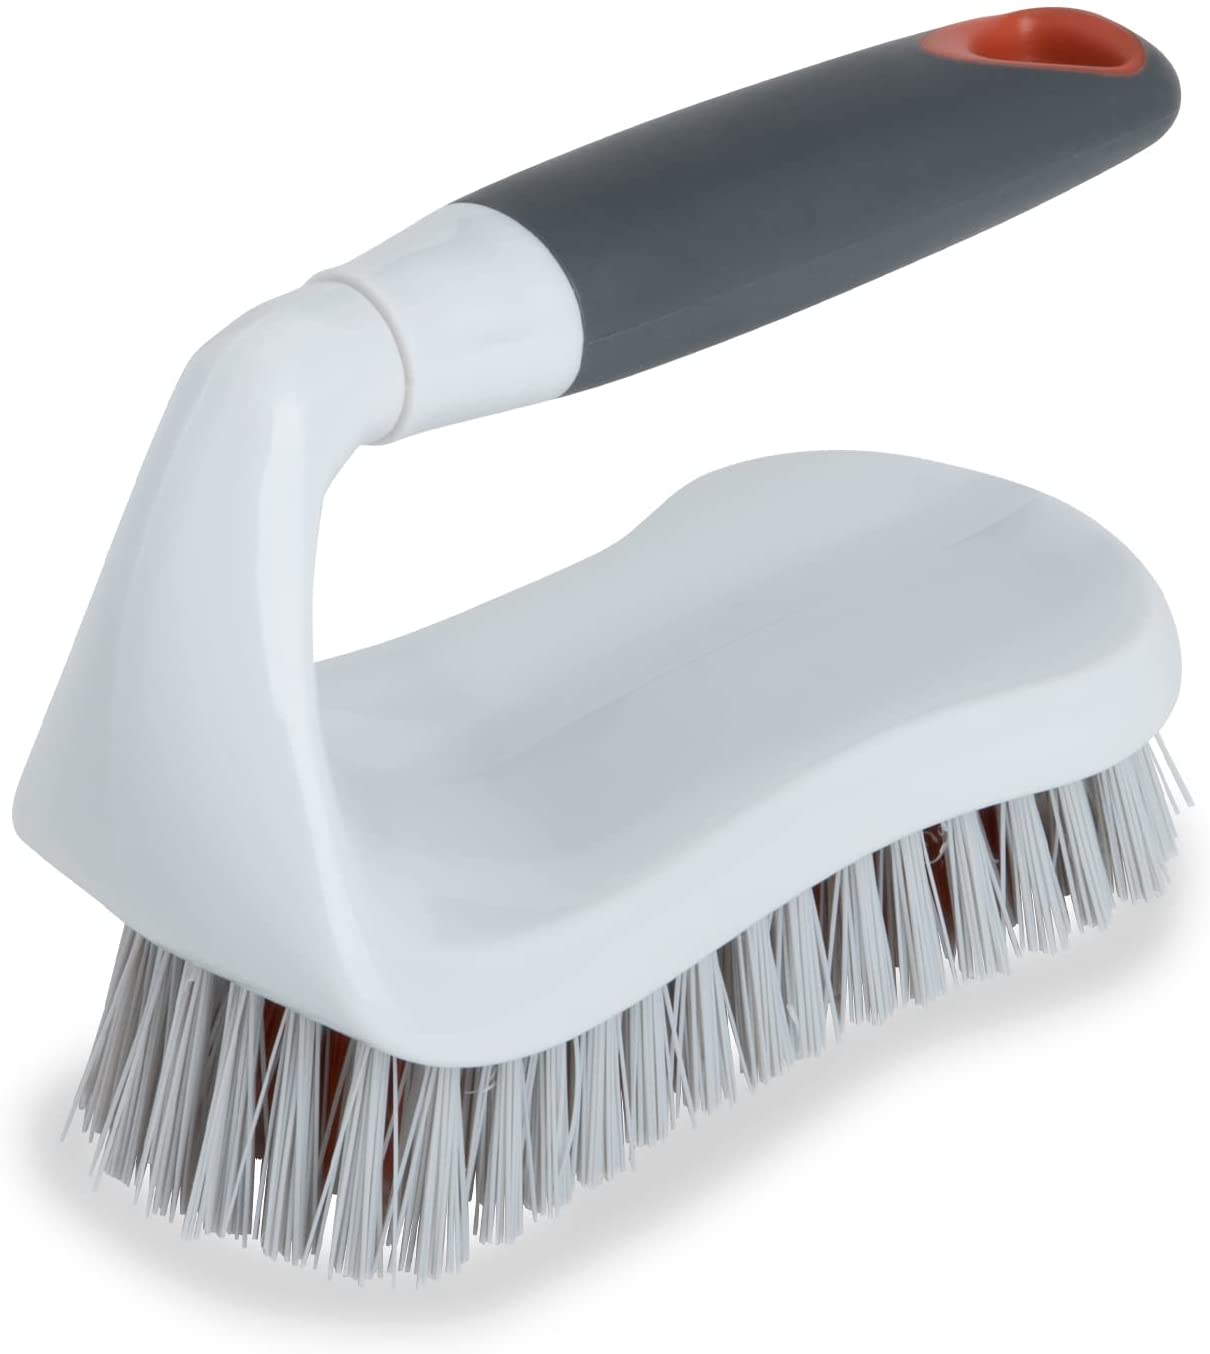 https://cdn.shopify.com/s/files/1/2393/7799/products/all-purpose-scrub-brush-smart-design-cleaning-7001181-incrementing-number-891996.jpg?v=1679345276